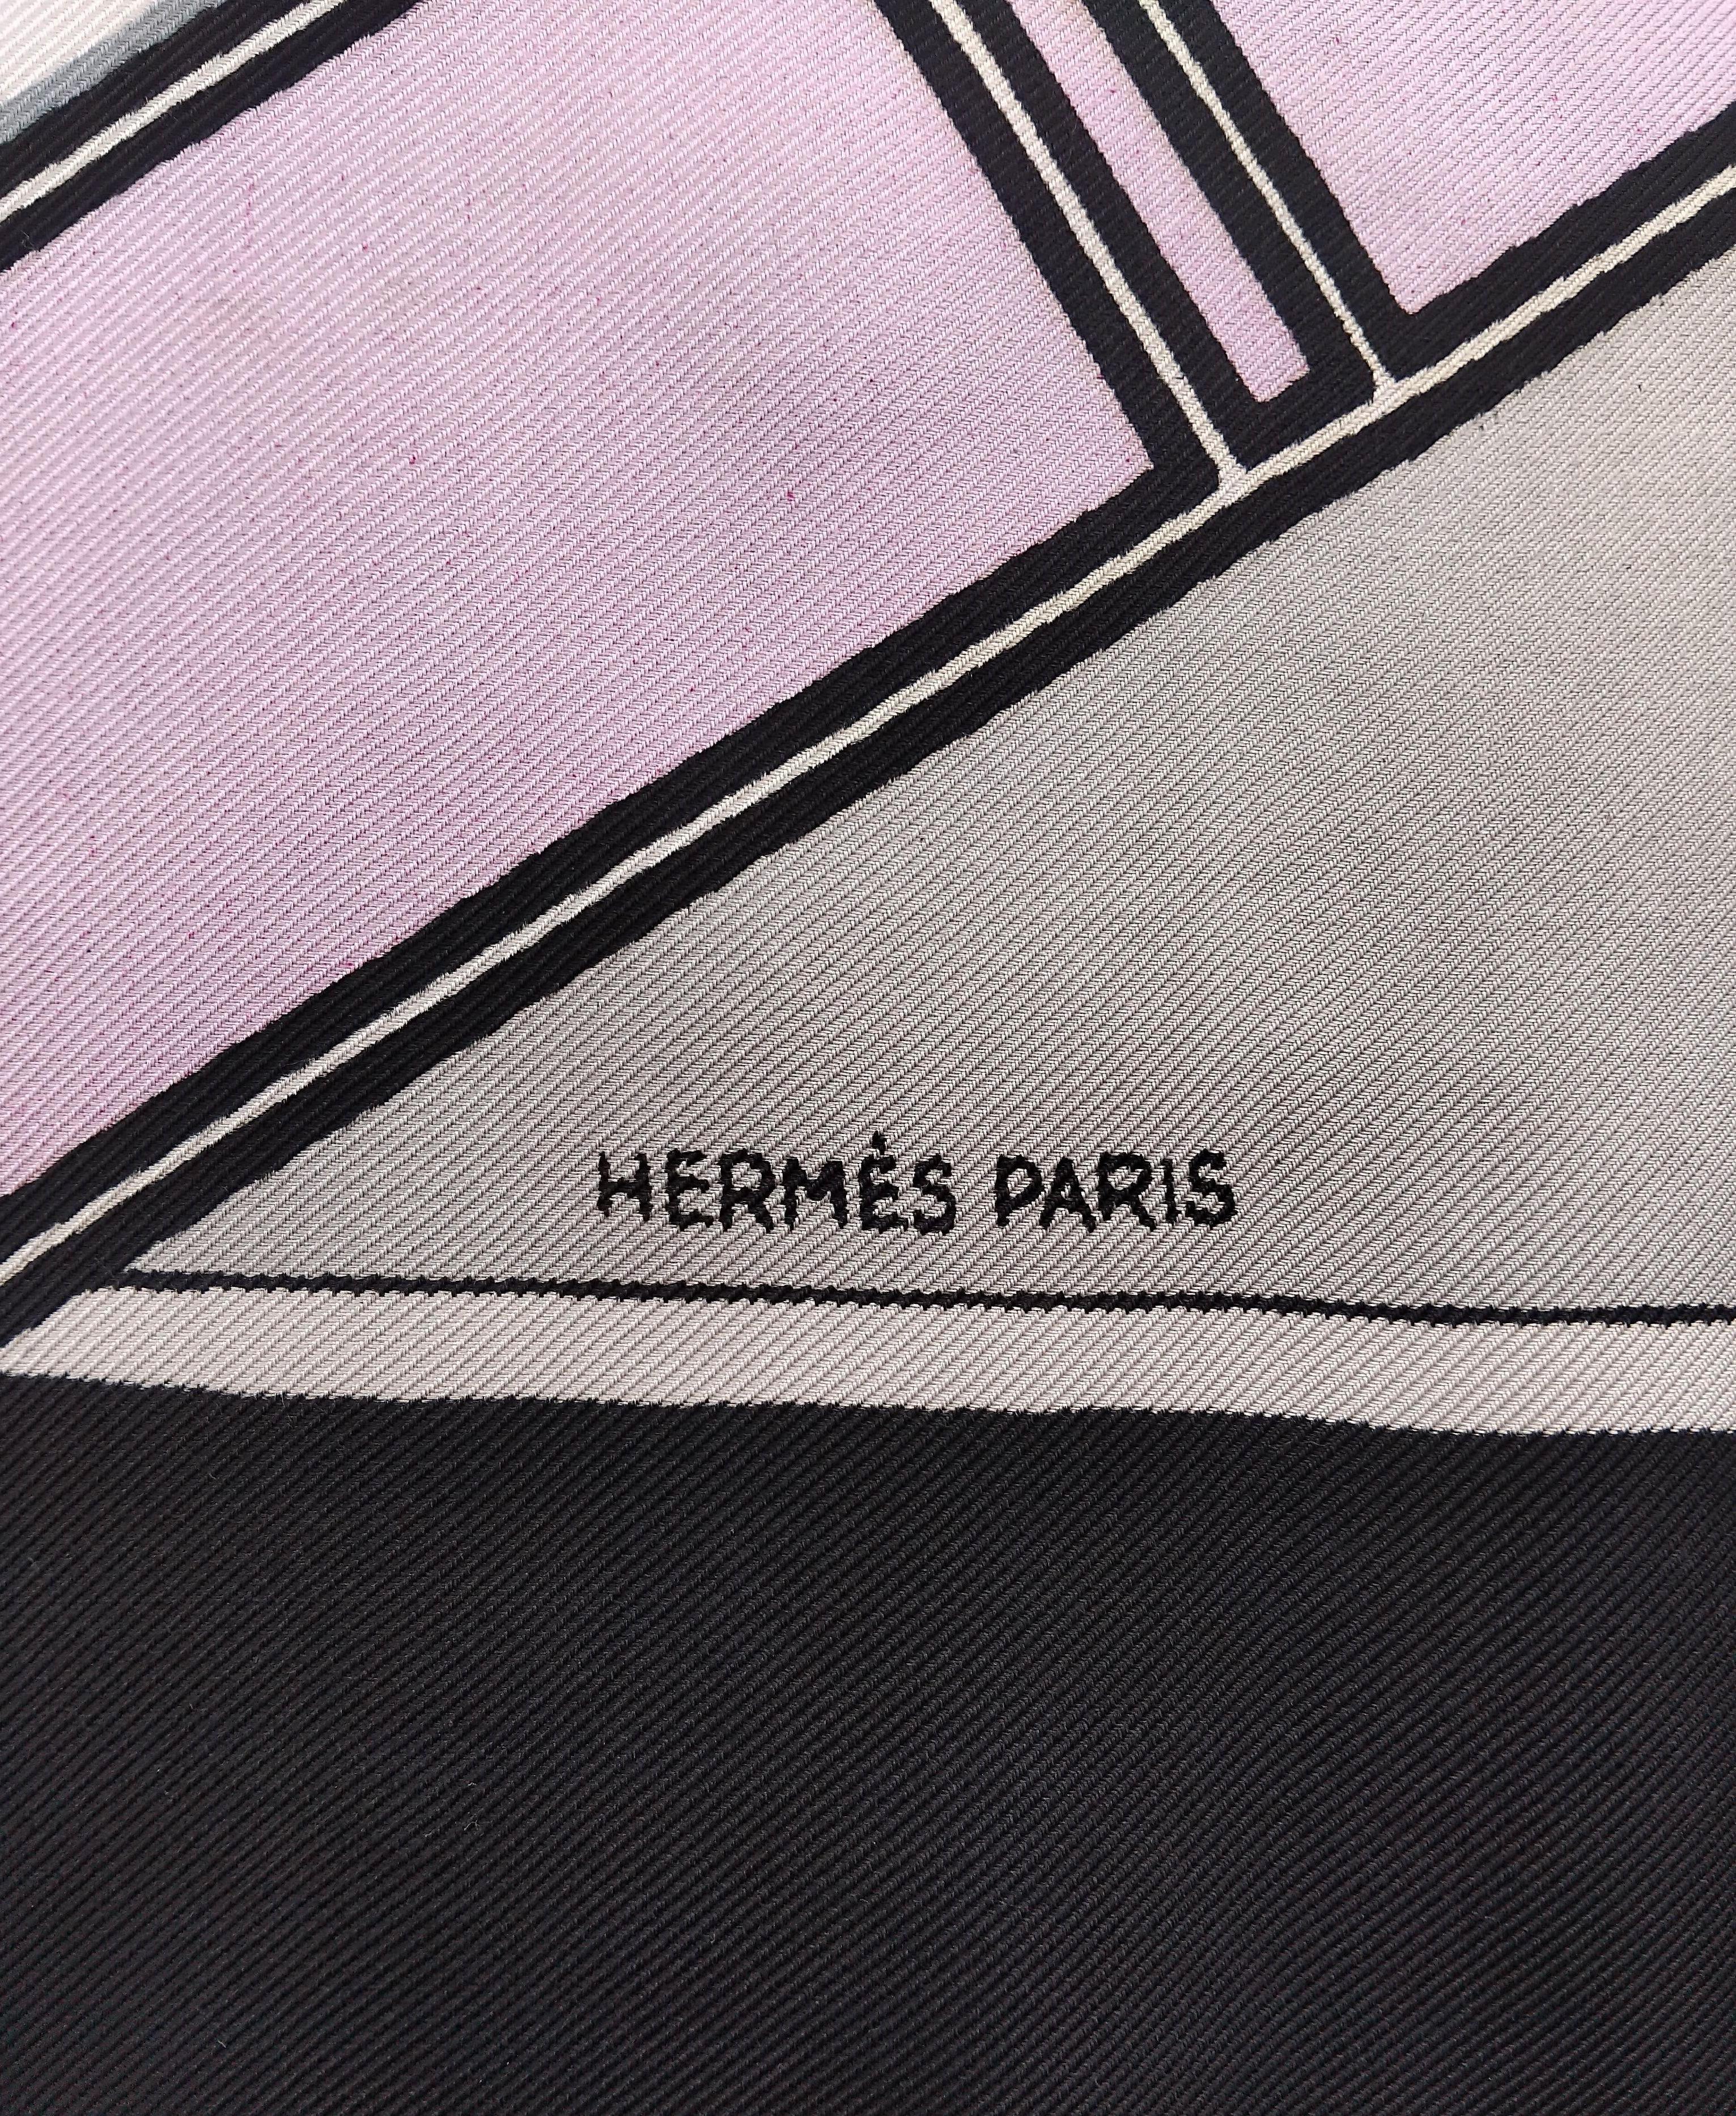 Exceptional Hermès Vintage Silk Scarf Echecs Charles Pittner Chess 1939  For Sale 2